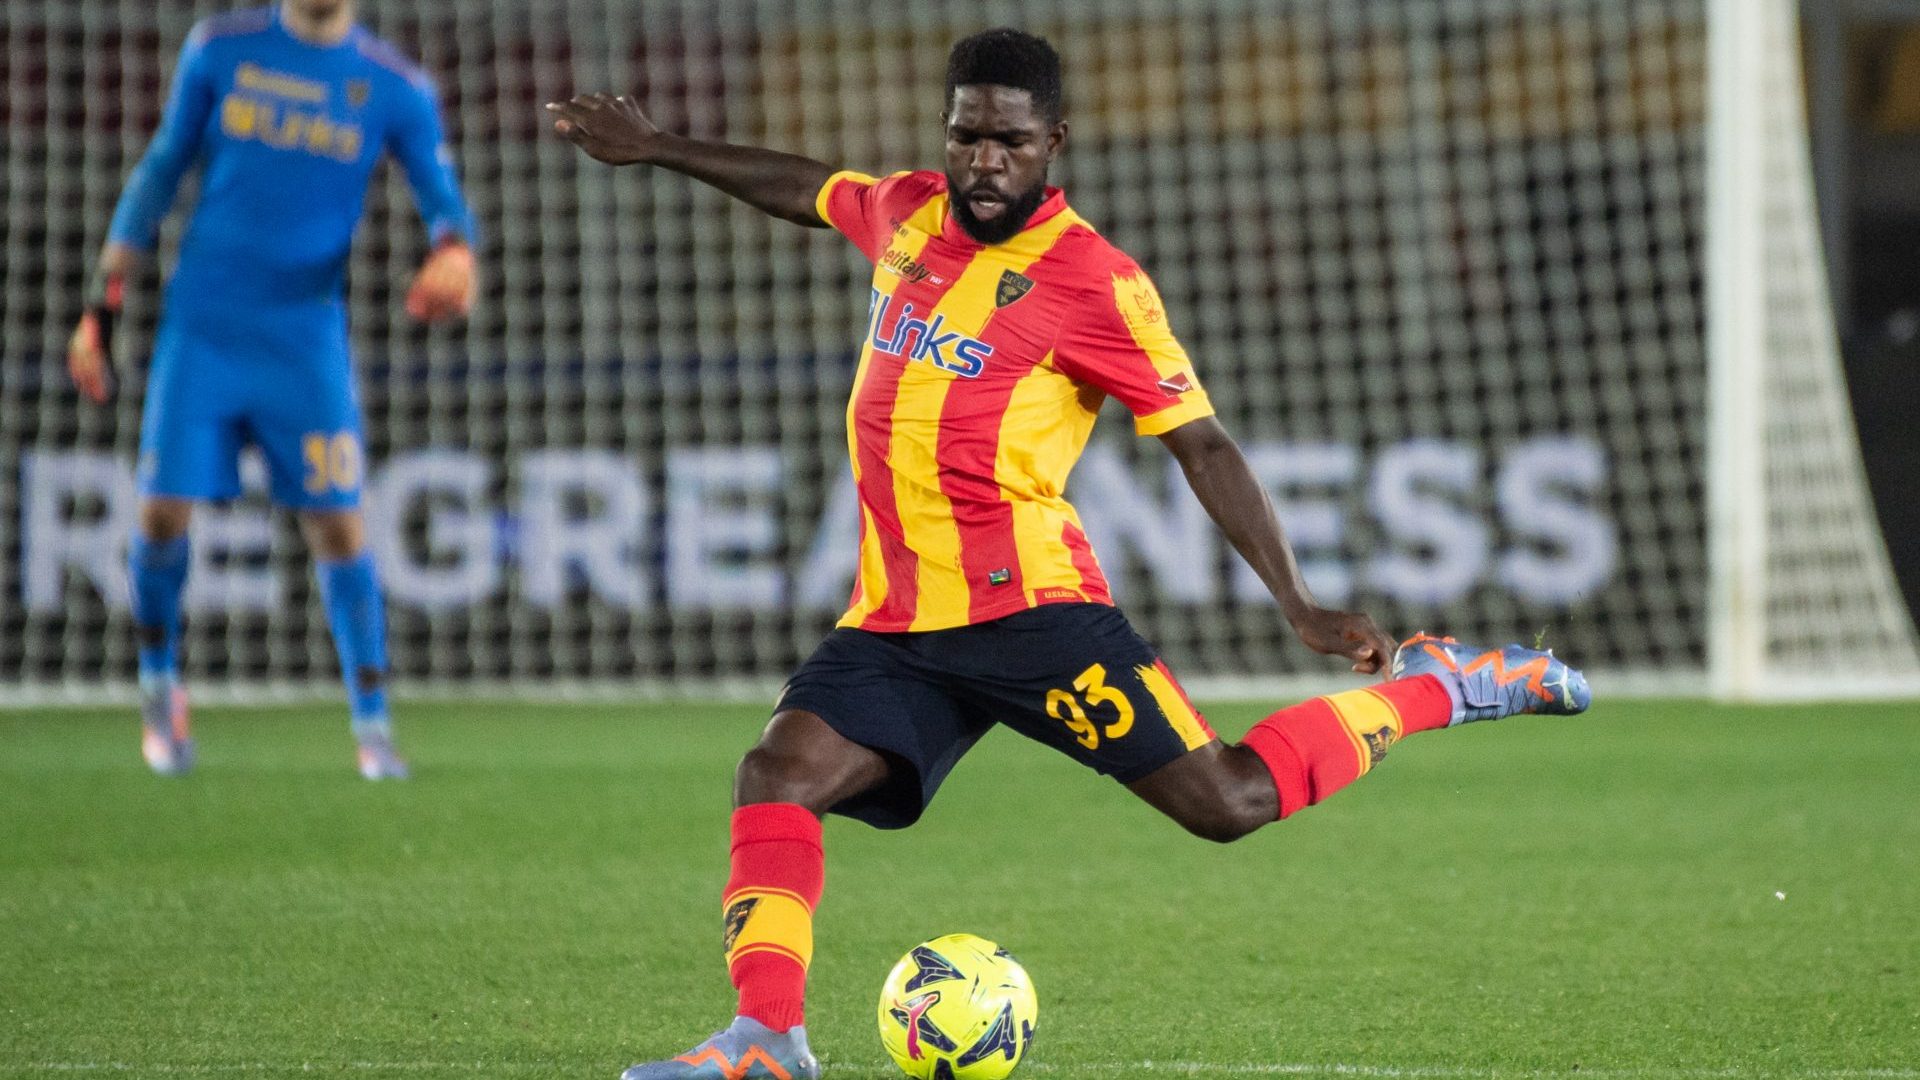 Samuel Umtiti of US Lecce in action during the Serie A match between US Lecce and Salernitana at Stadio Via del Mare. Photo: Ivan Romano/Getty Images